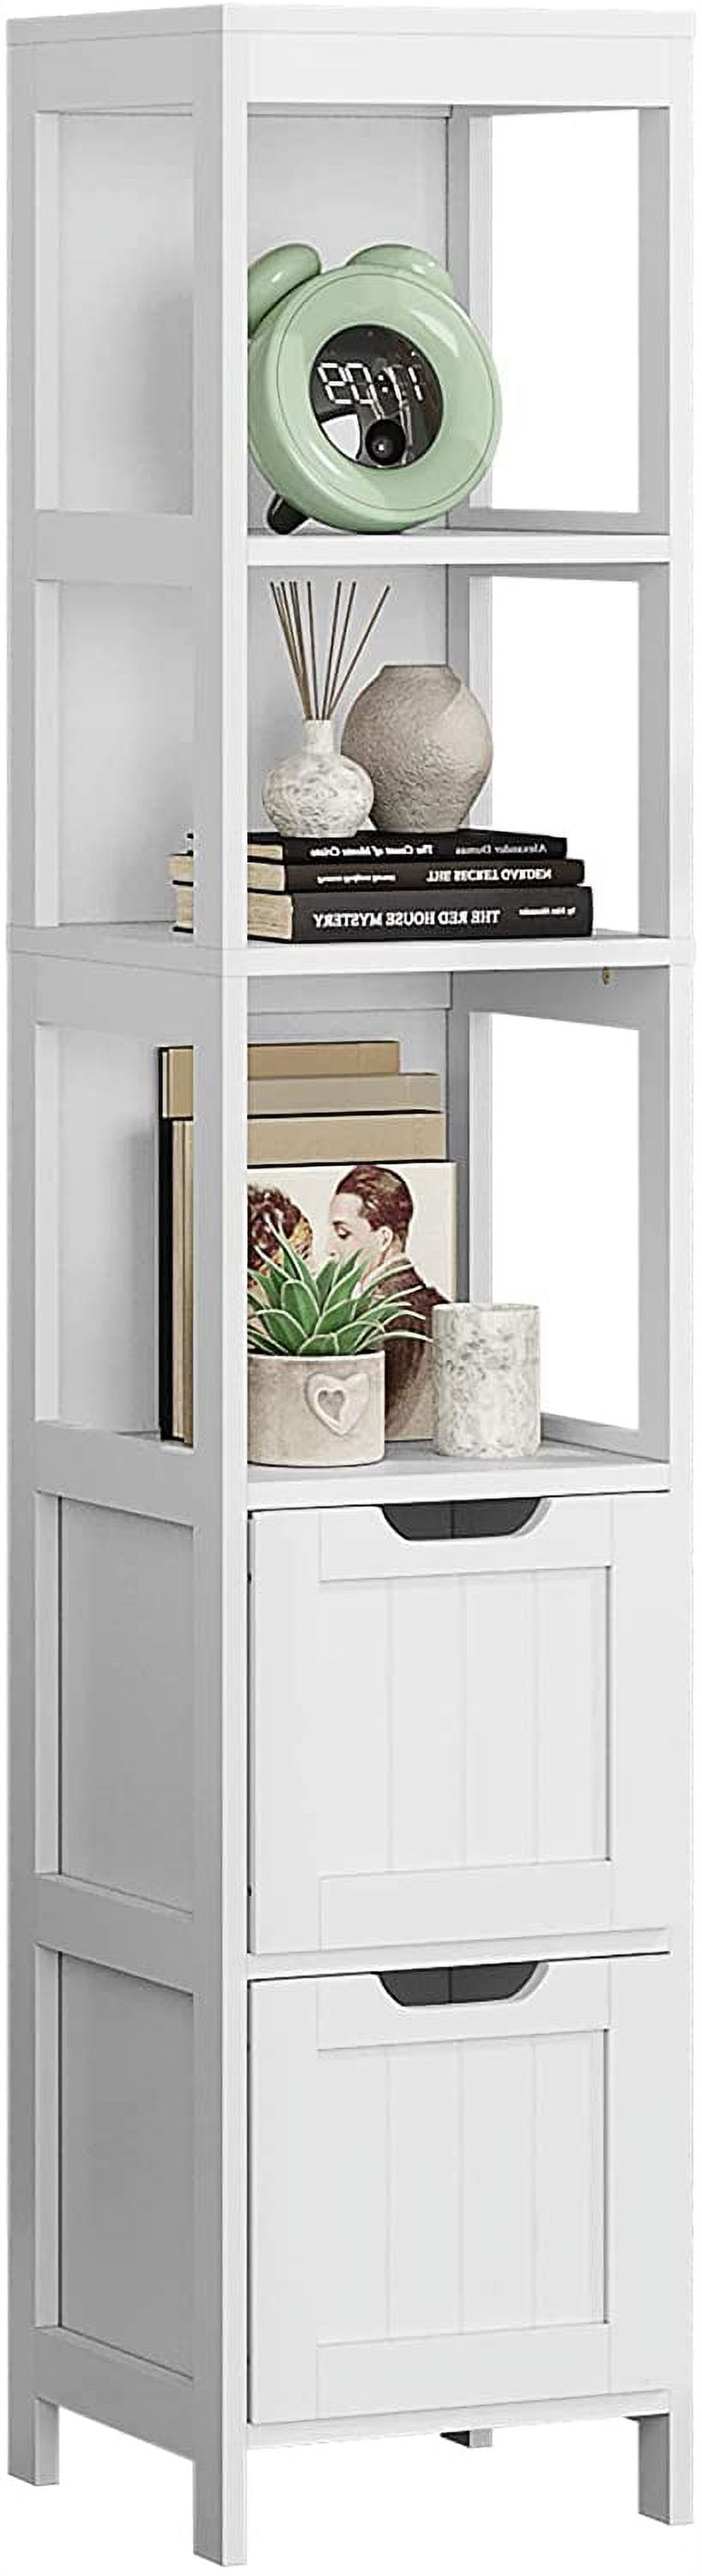 Merax Tall Bathroom Storage Cabinet, Slim Linen Tower with 3 Drawers and  Door, Adjustable Shelves, White